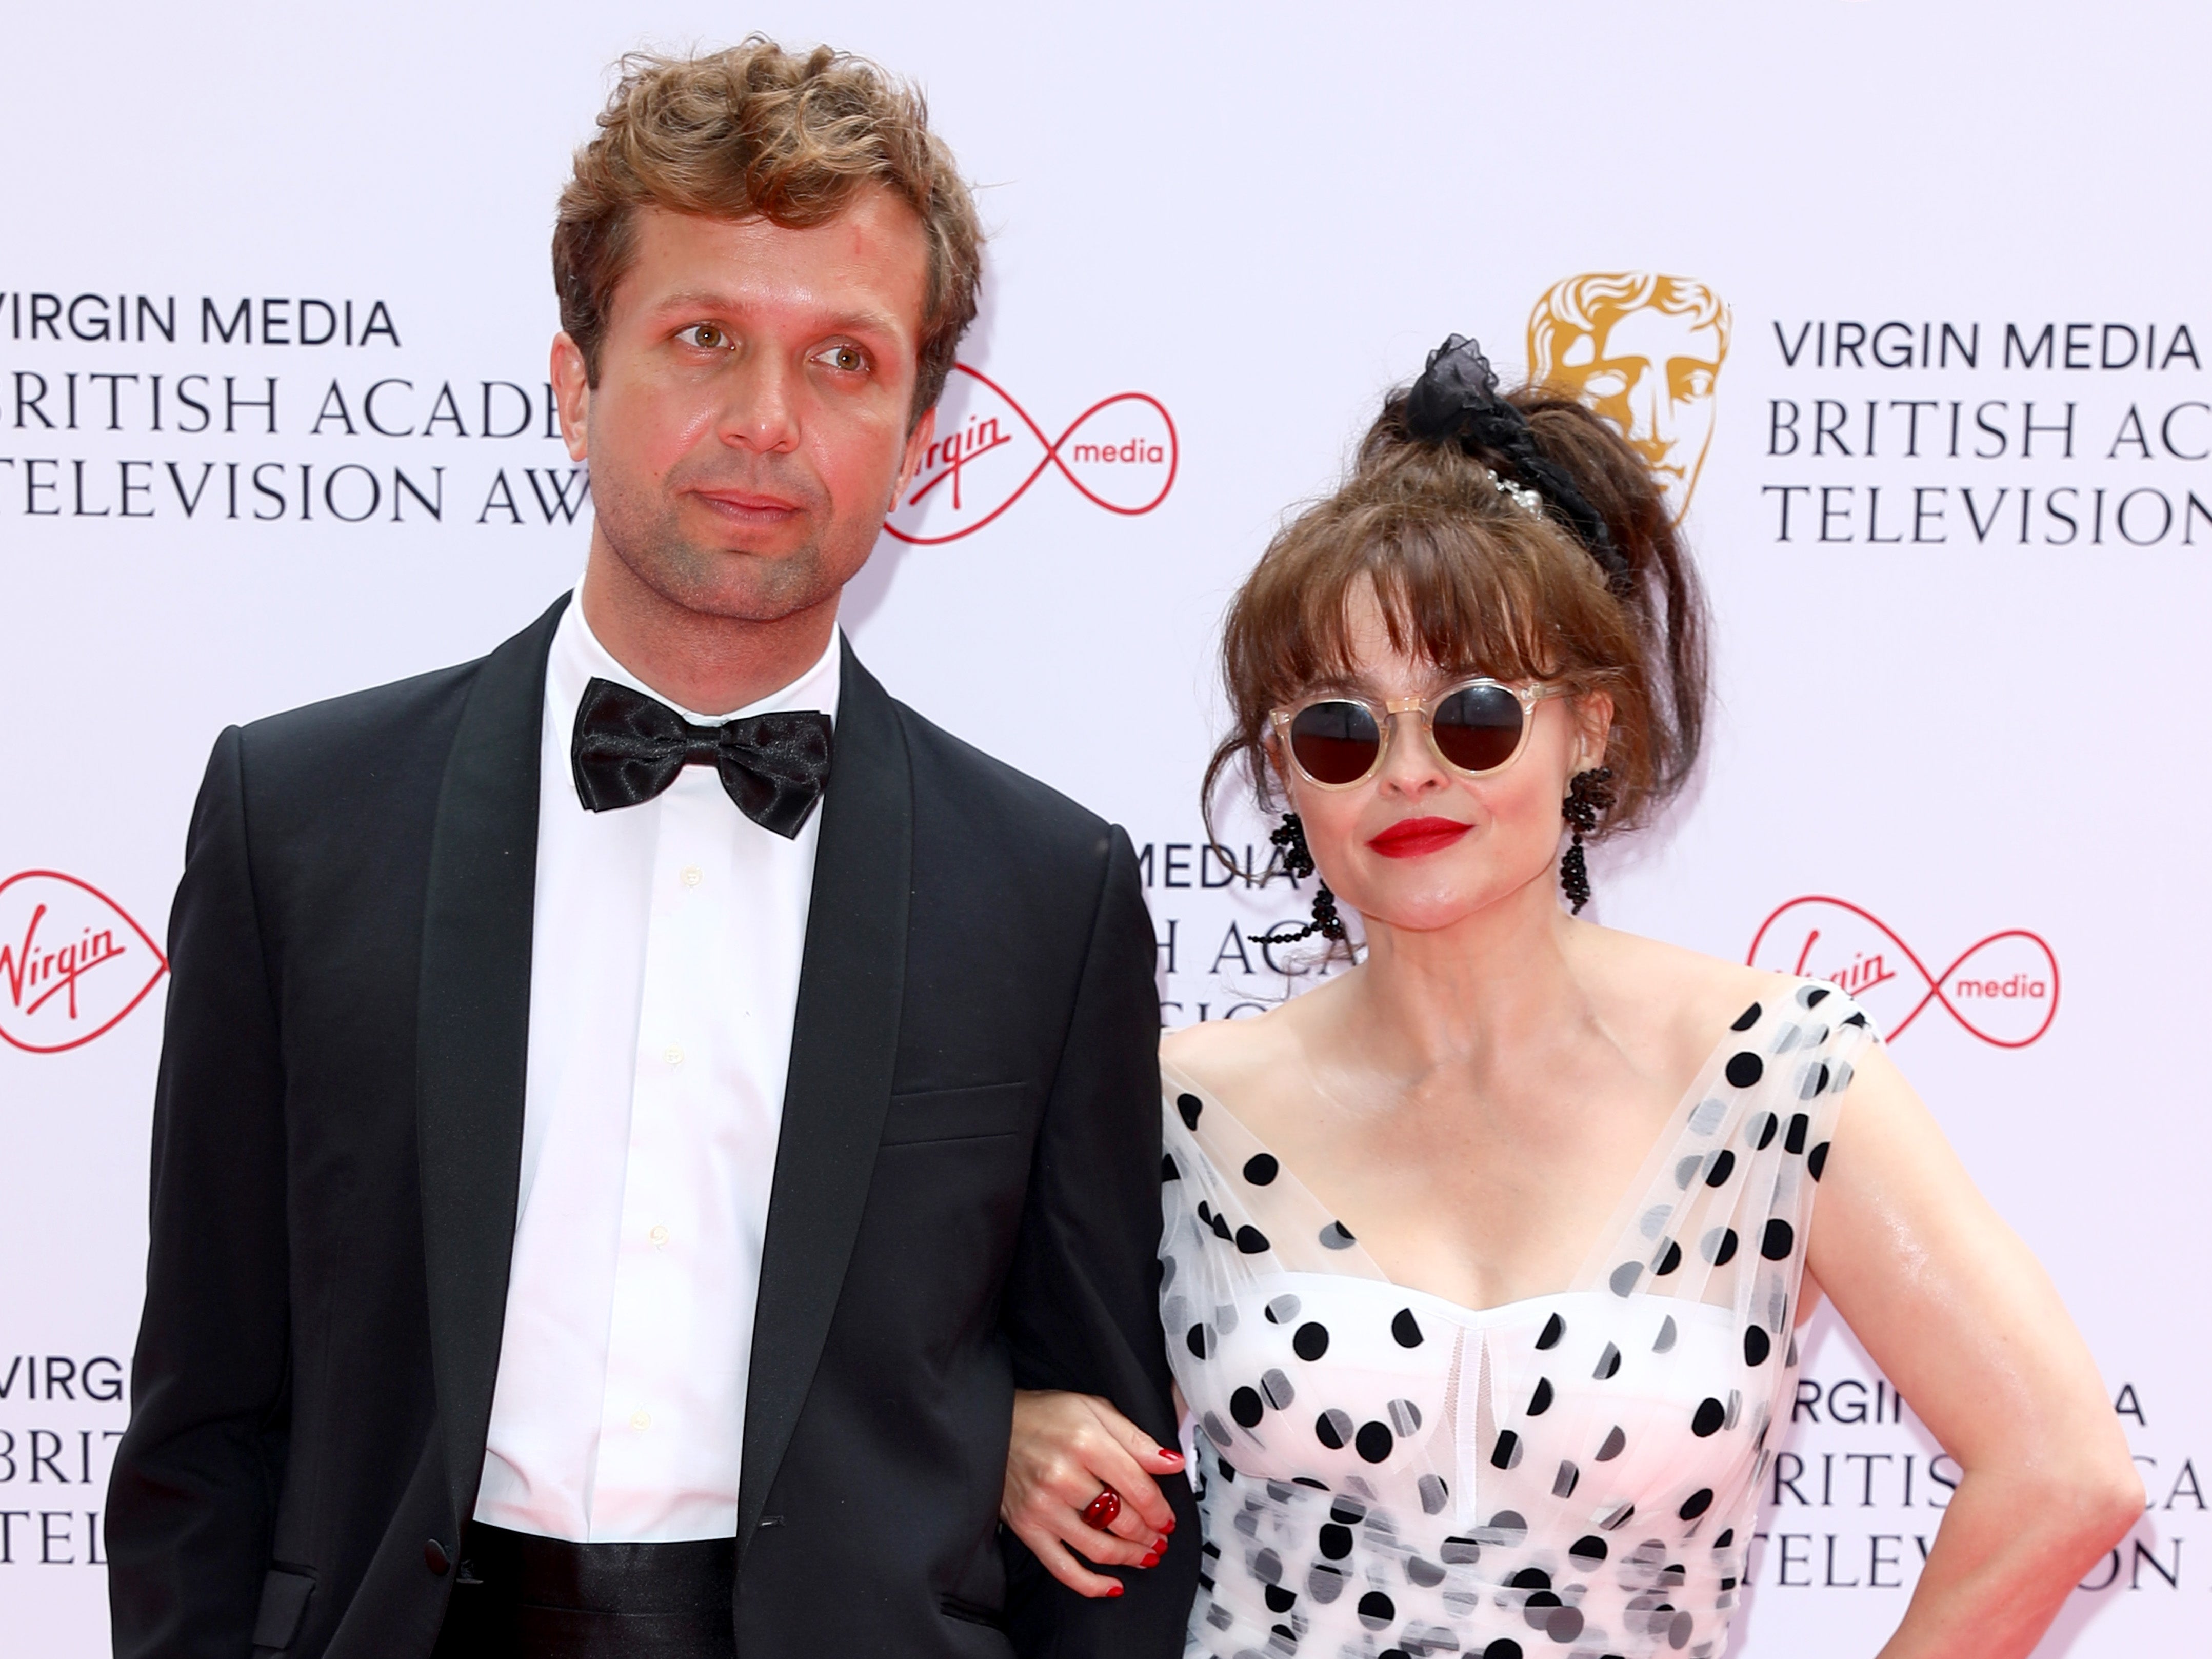 Helena Bonham Carter jokes about 21-year age gap with boyfriend We say Im siphoning off his youth at night The Independent pic